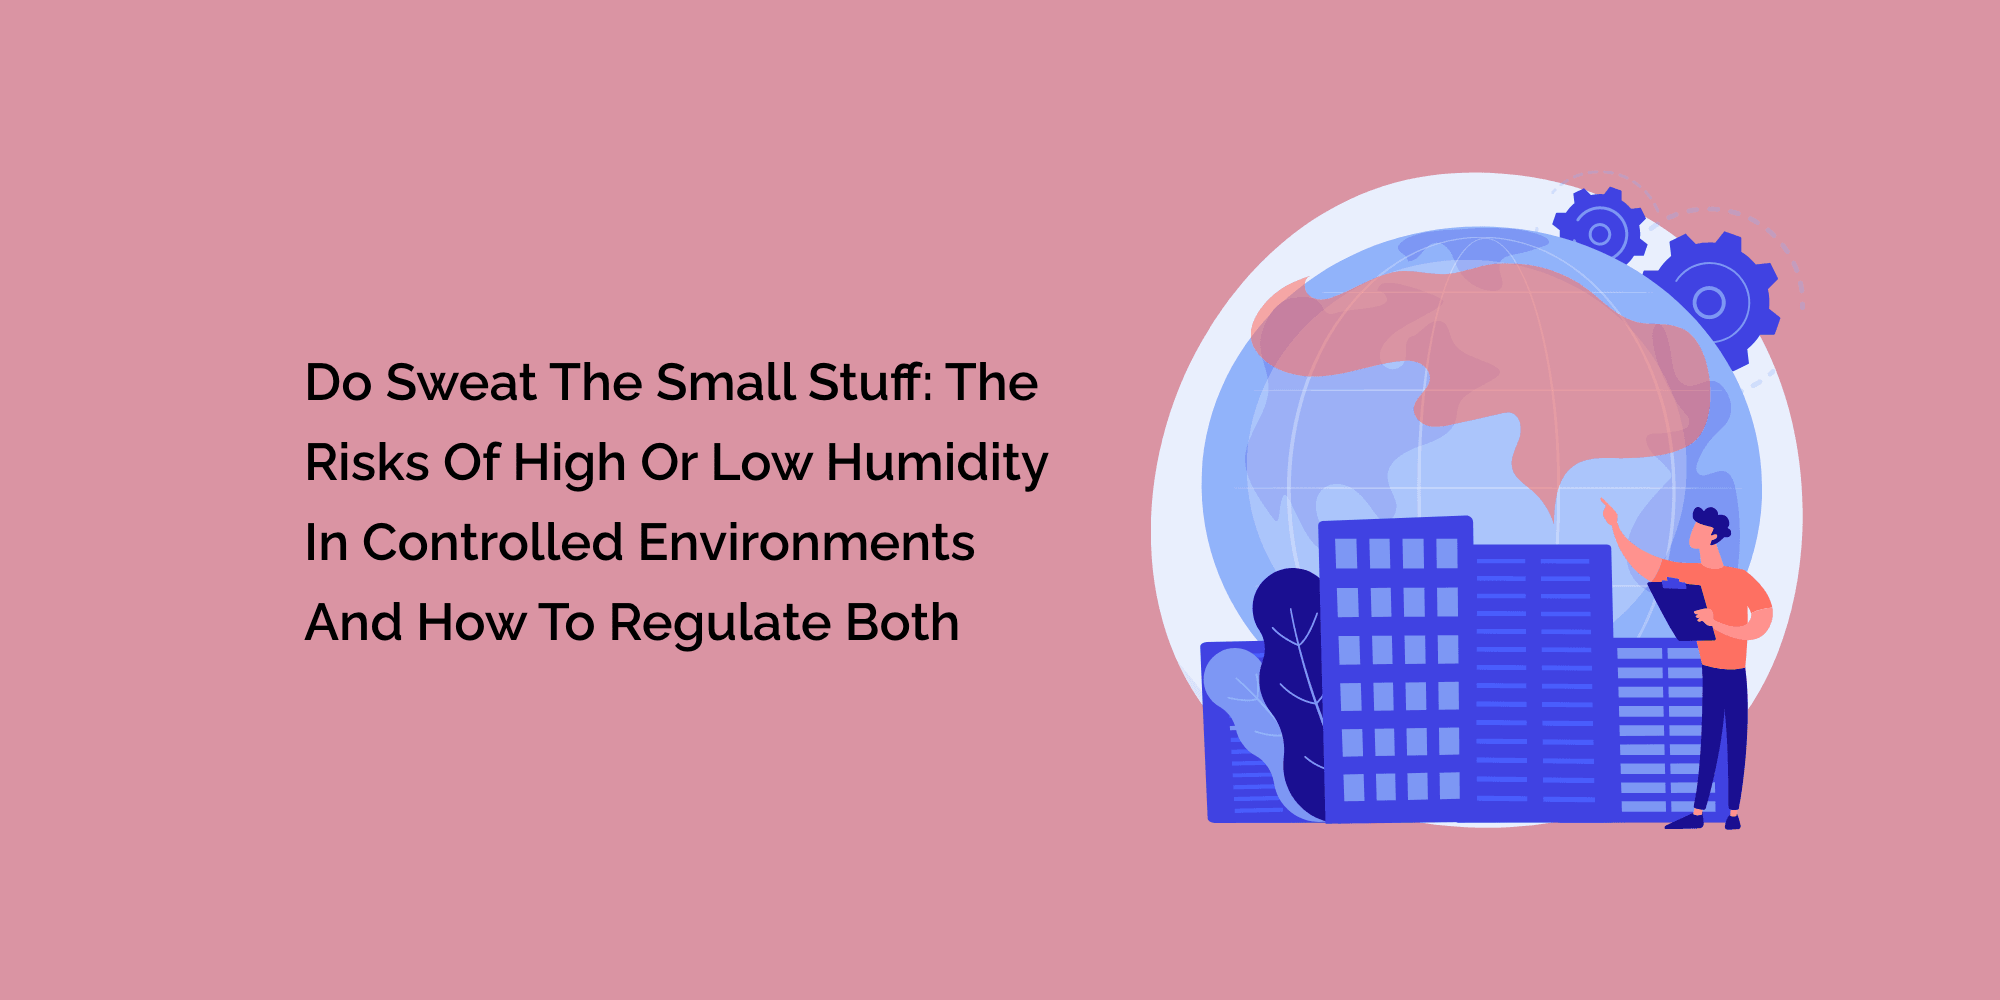 Do Sweat the Small Stuff: The Risks of High or Low Humidity in Controlled Environments and How to Regulate Both